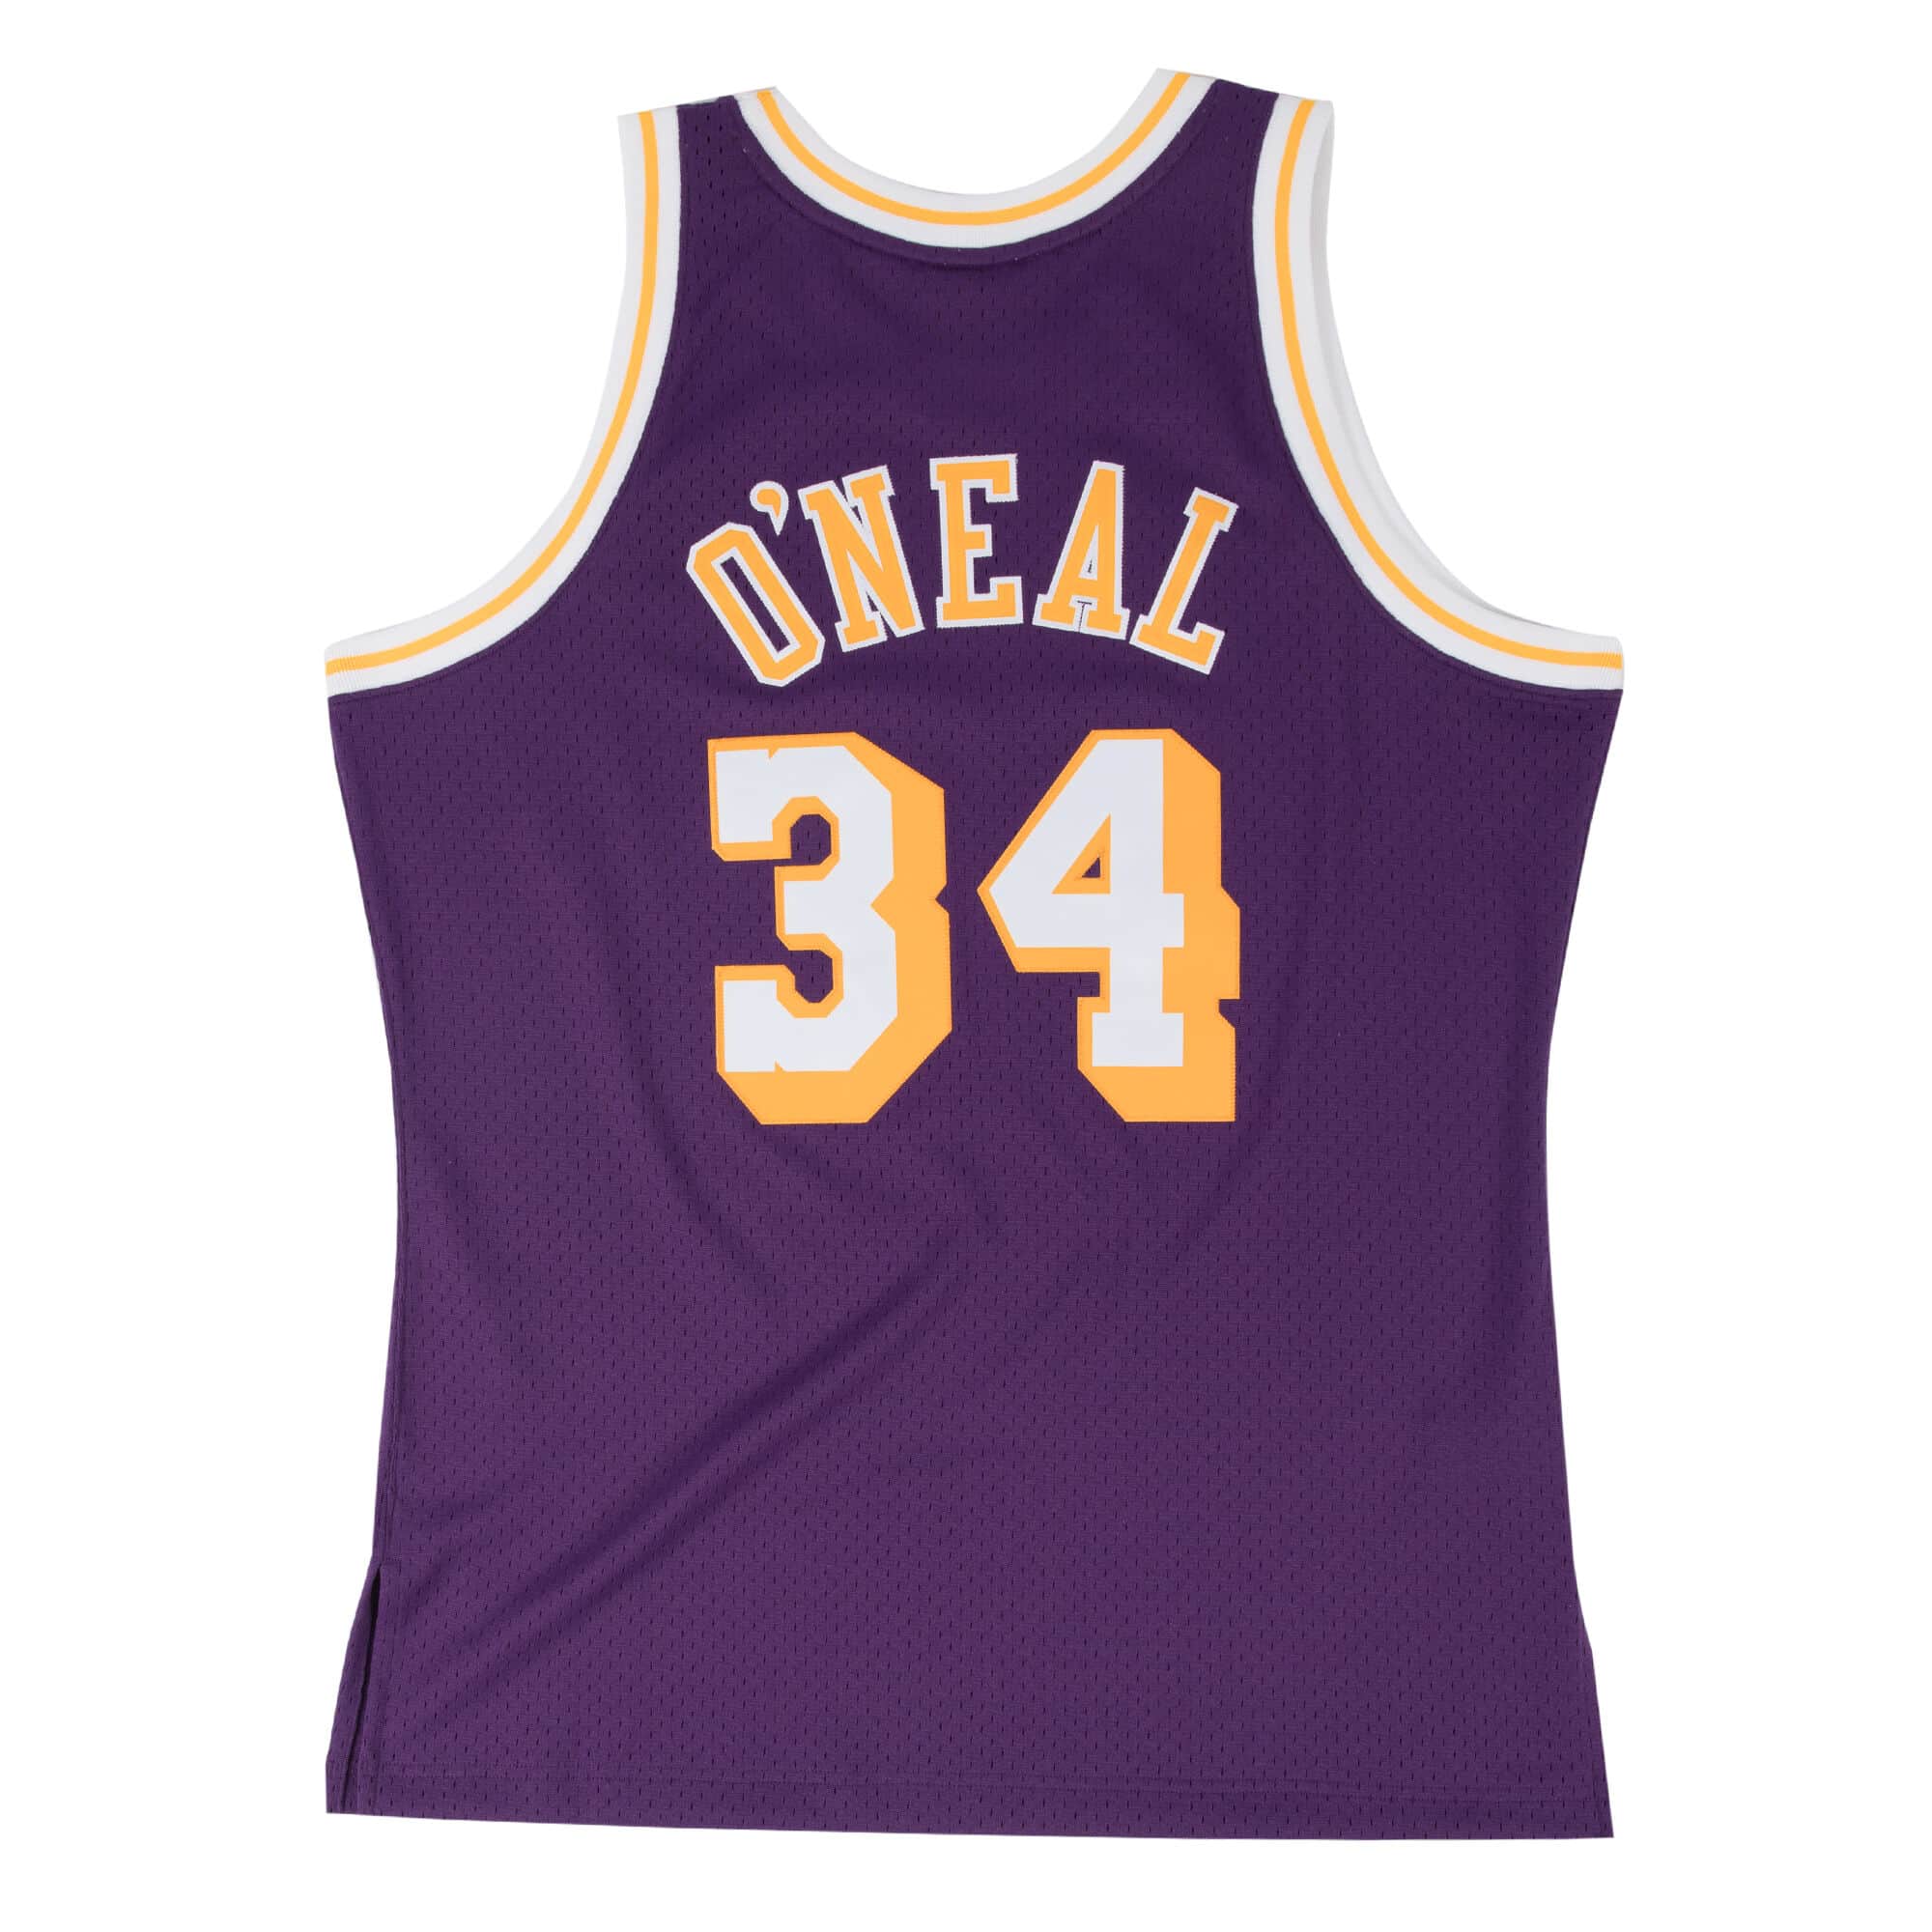 Los Angeles Lakers SHAQUILLE O'NEAL jersey Reebok white Men XL